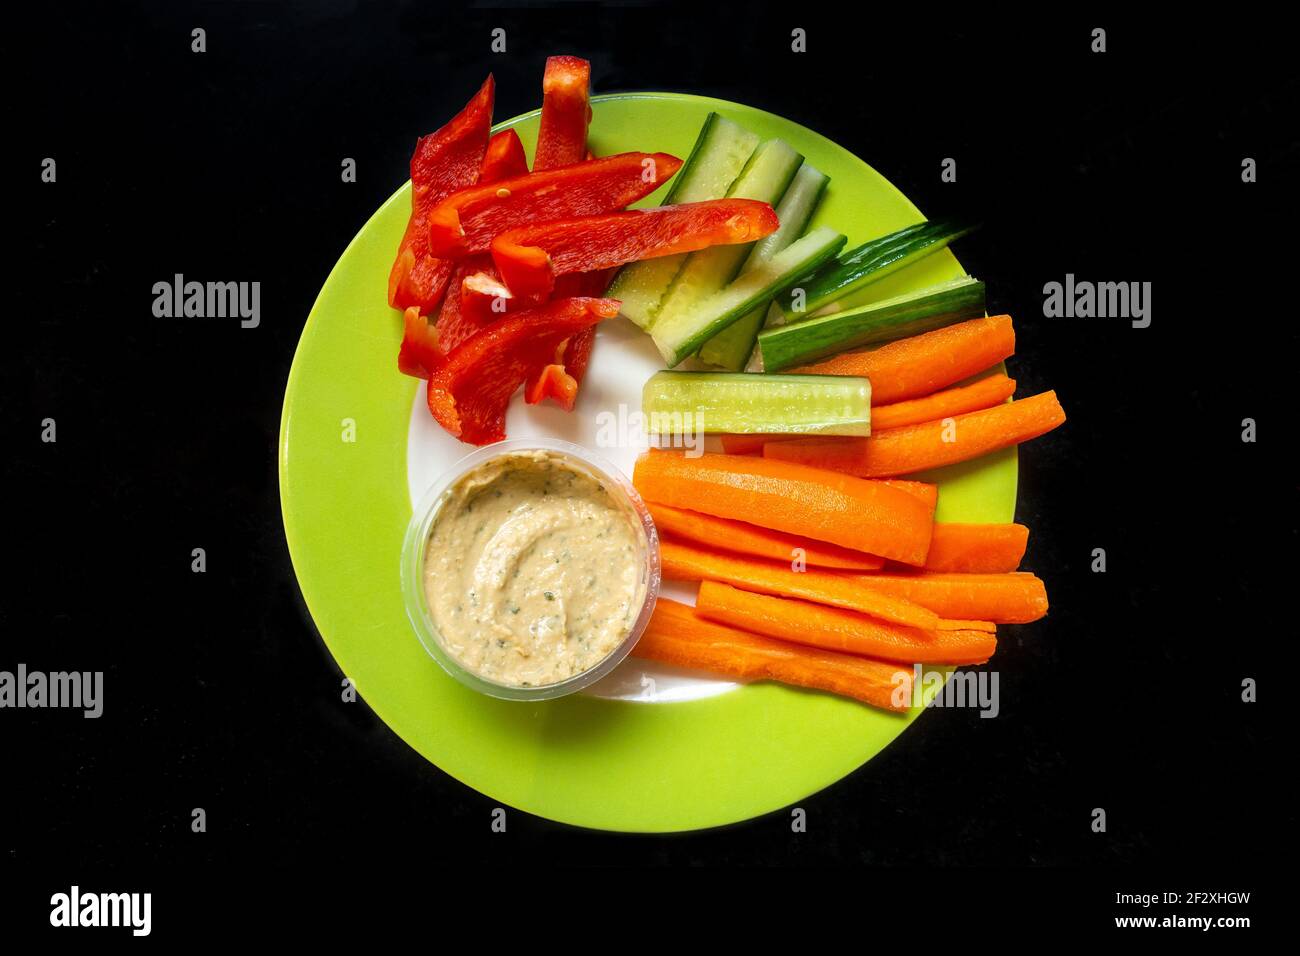 Healthy meal of sliced, raw vegetables with a humus dip isolated against a black background. Stock Photo